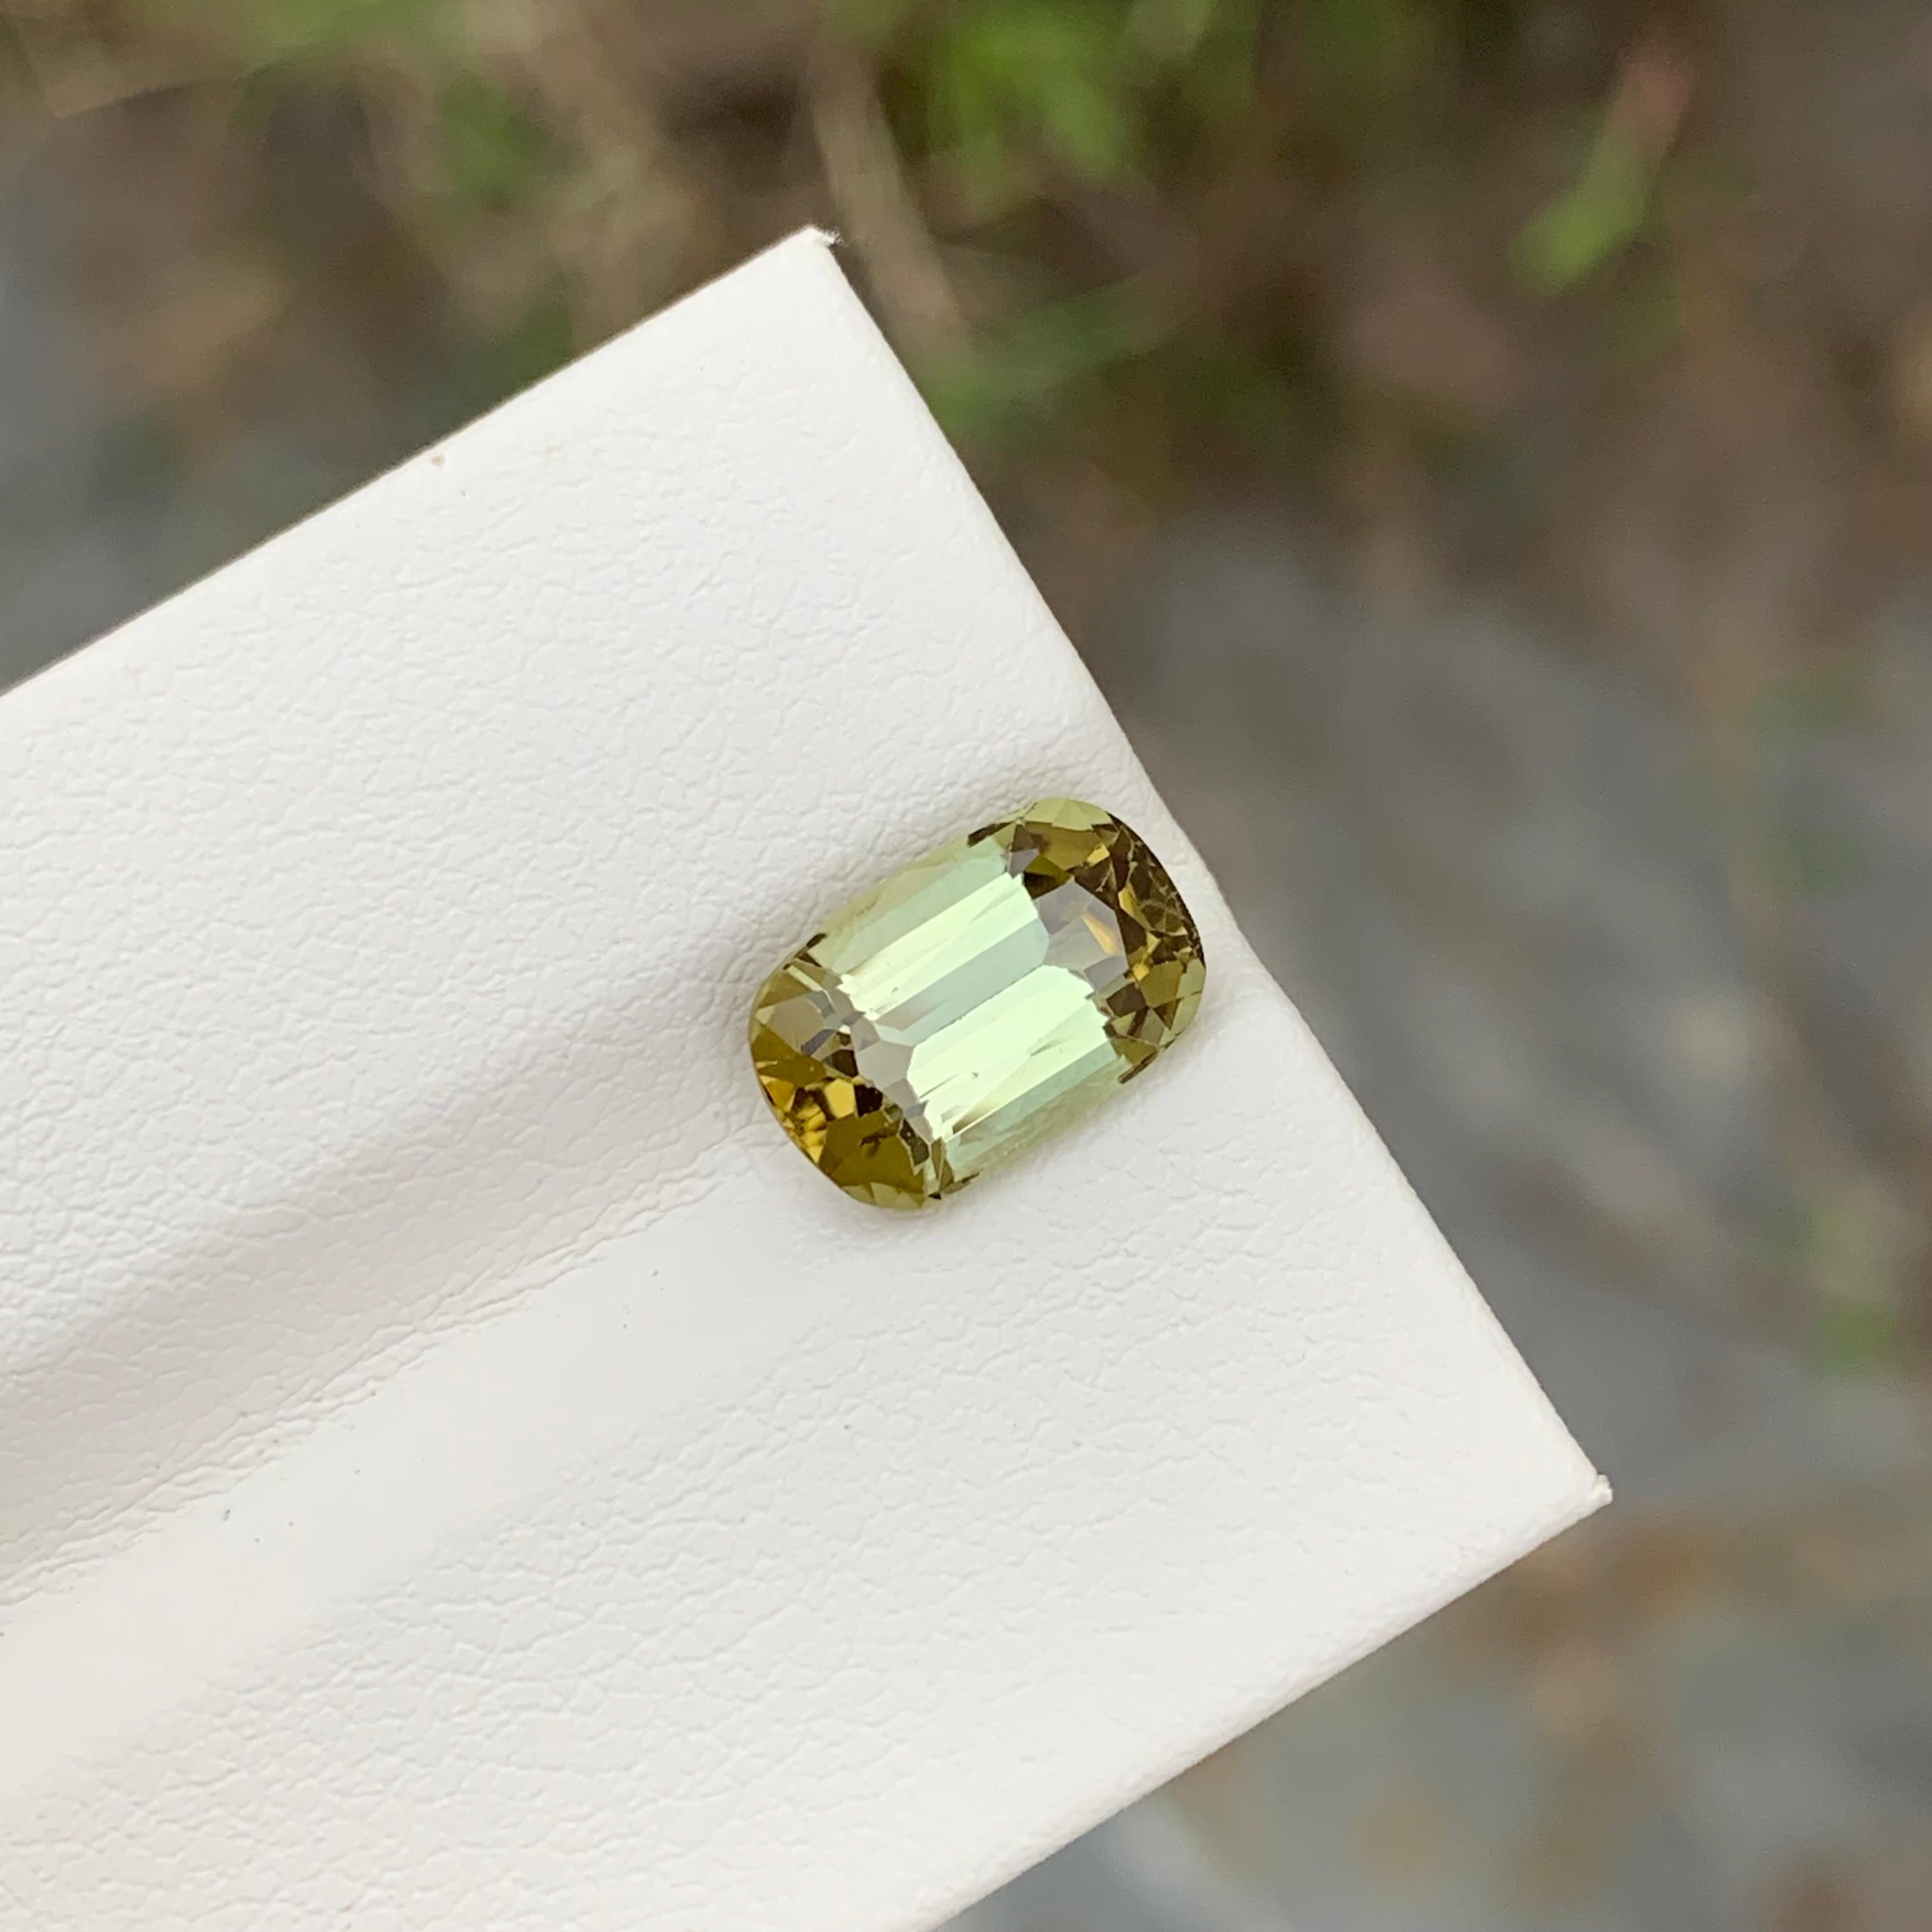 Loose Yellow Tourmaline

Weight: 3.00 Carats
Dimension: 10.3 x 6.7 x 5.7 Mm
Colour: Yellow
Origin: Africa
Certificate: On Demand
Treatment: Non

Tourmaline is a captivating gemstone known for its remarkable variety of colors, making it a favorite